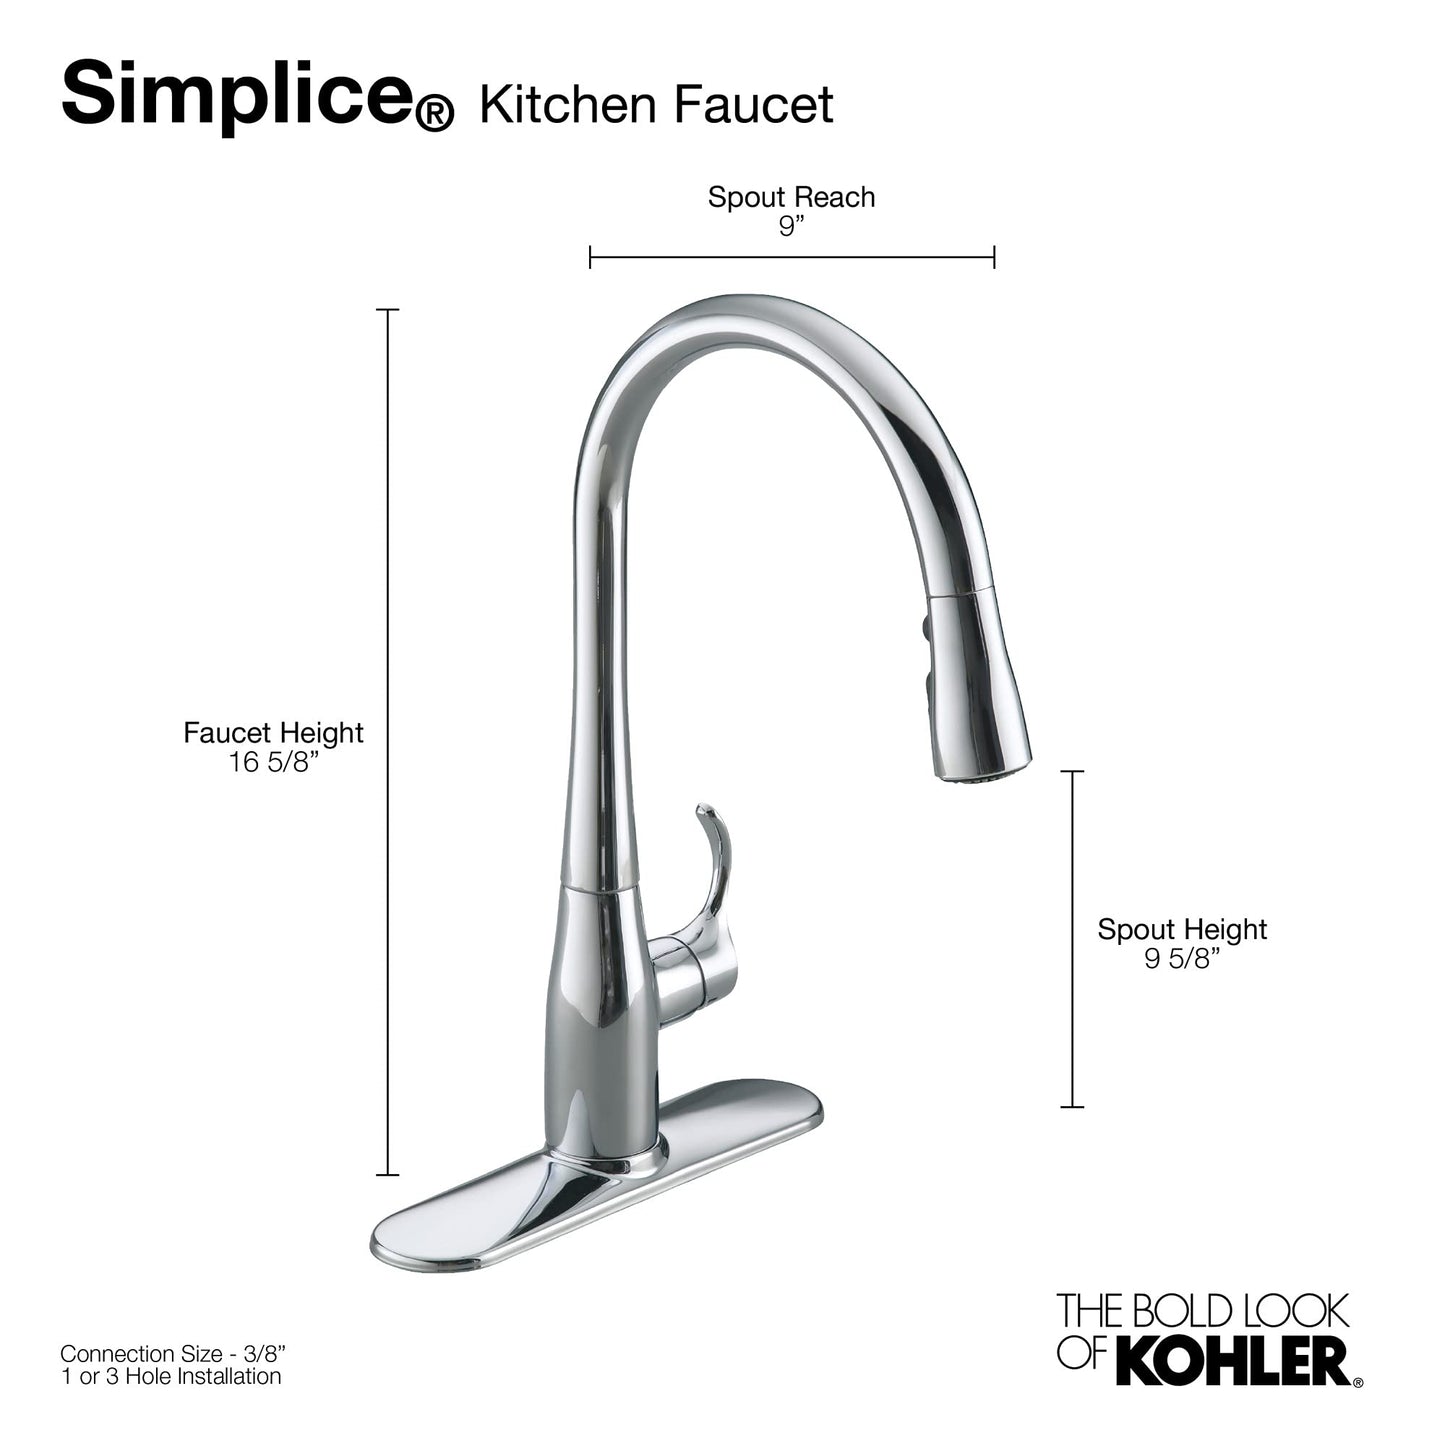 KOHLER 596-VS Simplice Pull Down Kitchen Faucet, 3-Spray Faucet, Kitchen Sink Faucet with Pull Down Sprayer, Vibrant Stainless, High Arch - Very Good